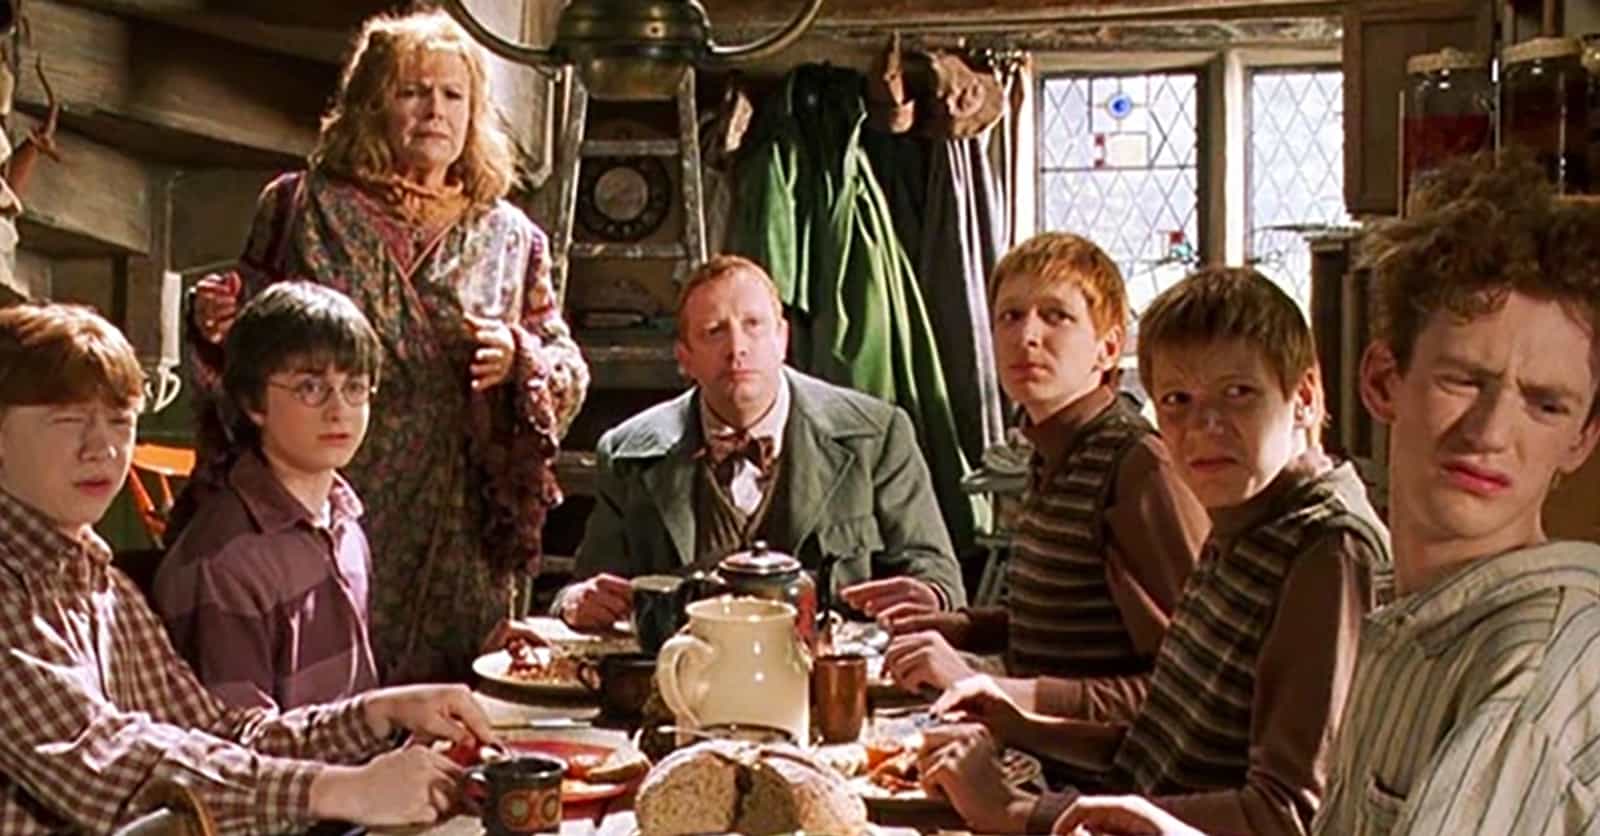 20 Hilarious Weasley Family Moments That Made Us Laugh Like A Tickling Charm